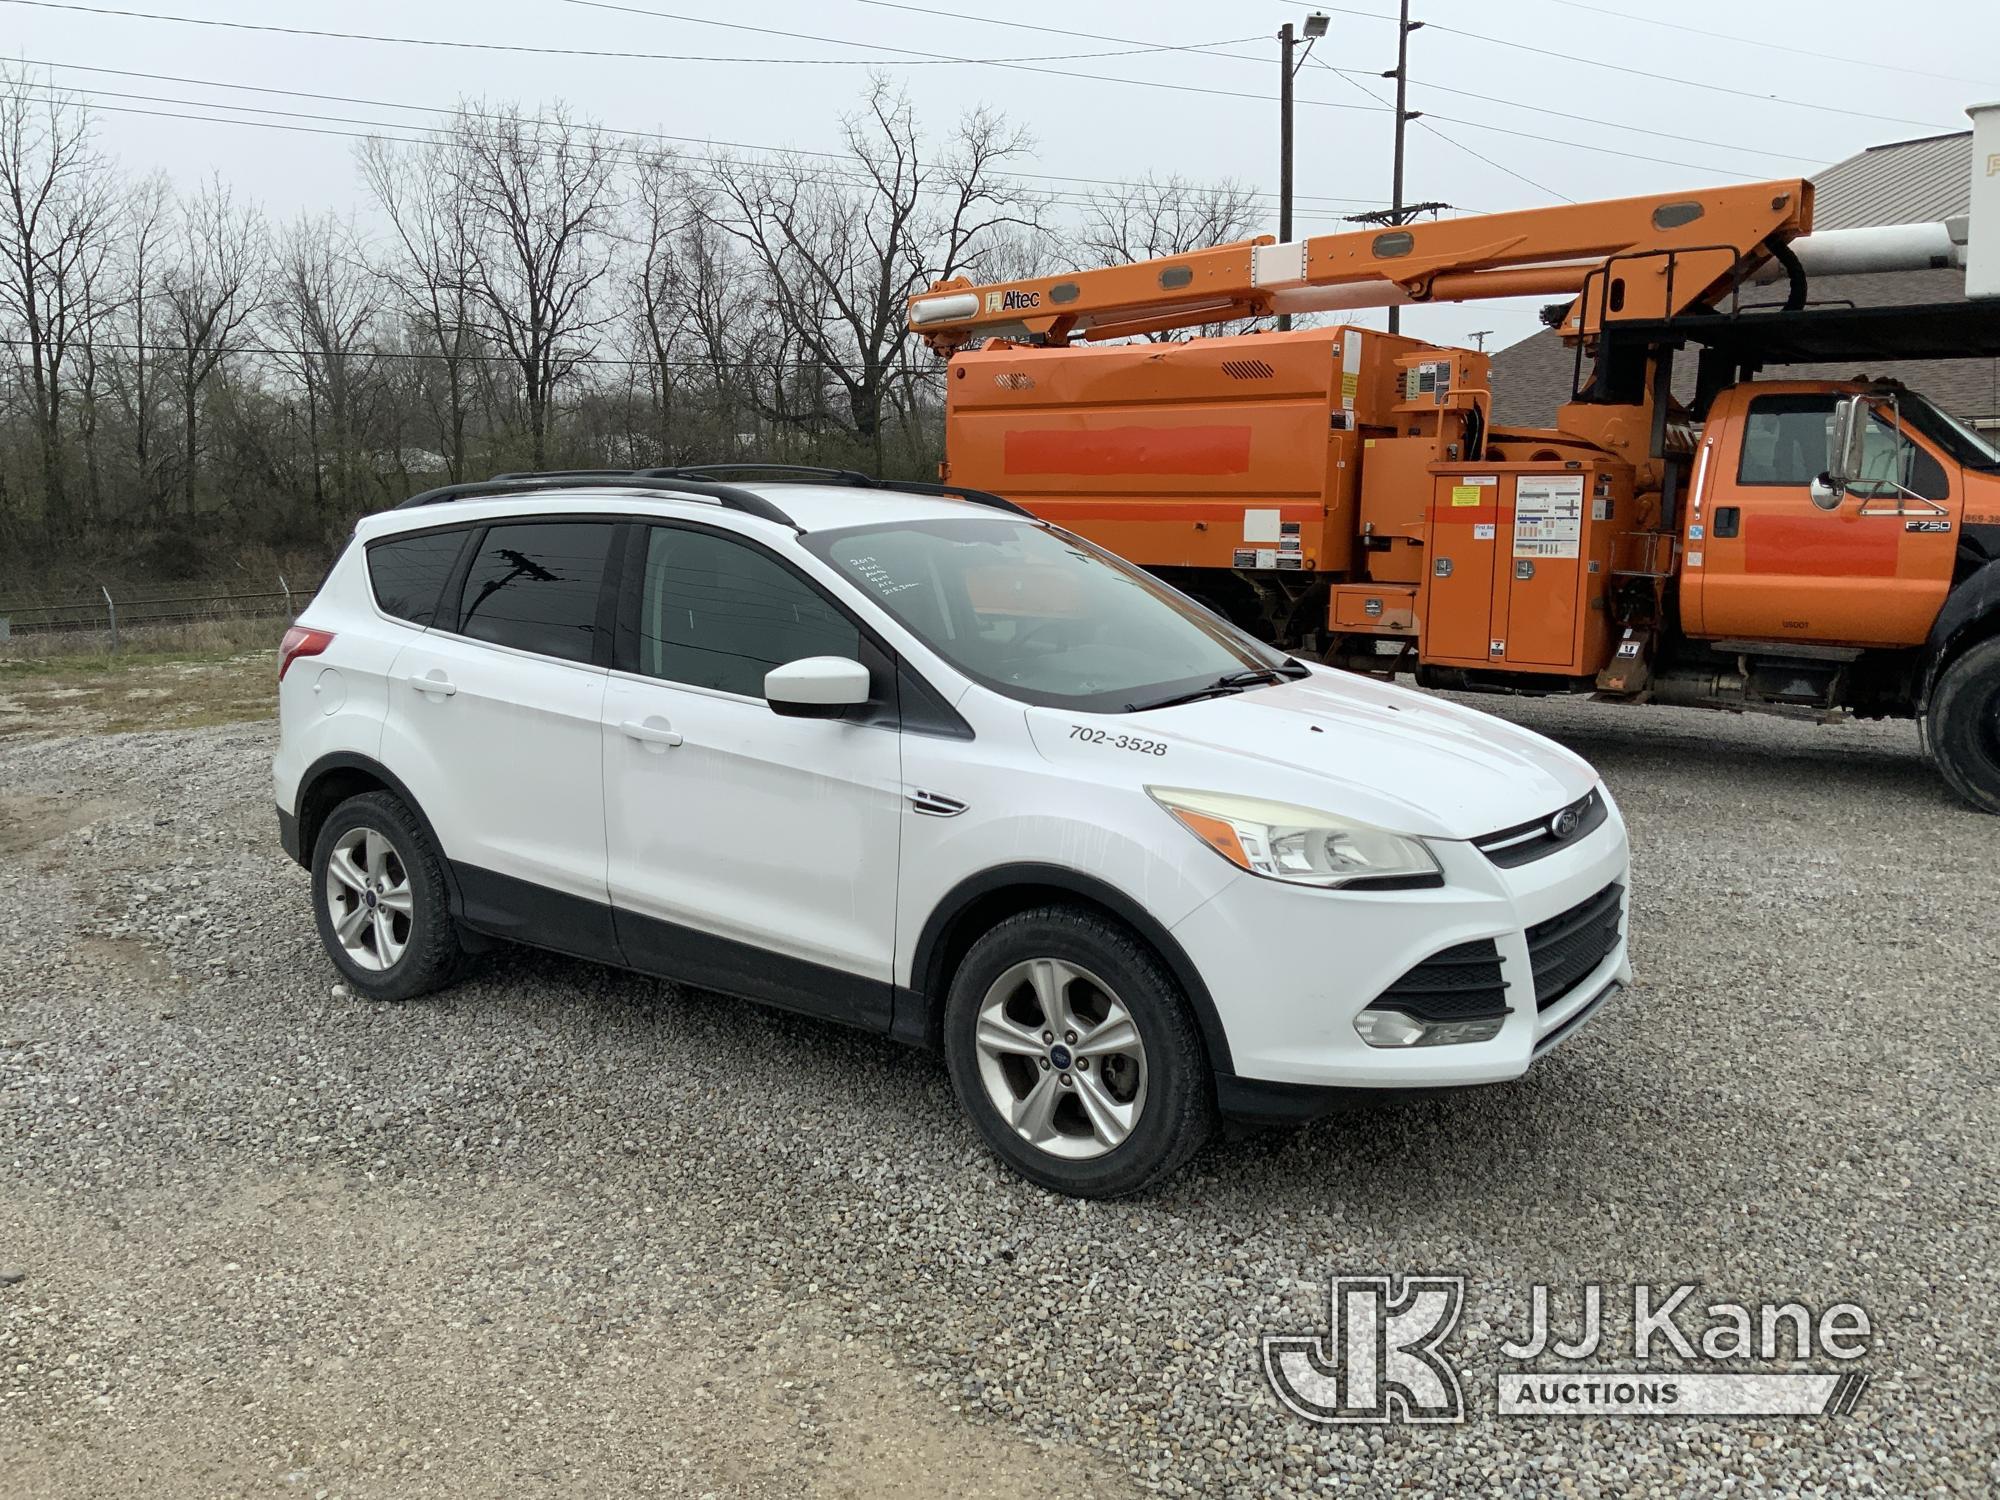 (Fort Wayne, IN) 2013 Ford Escape 4x4 4-Door Sport Utility Vehicle Runs & Moves) (Check Engine Light